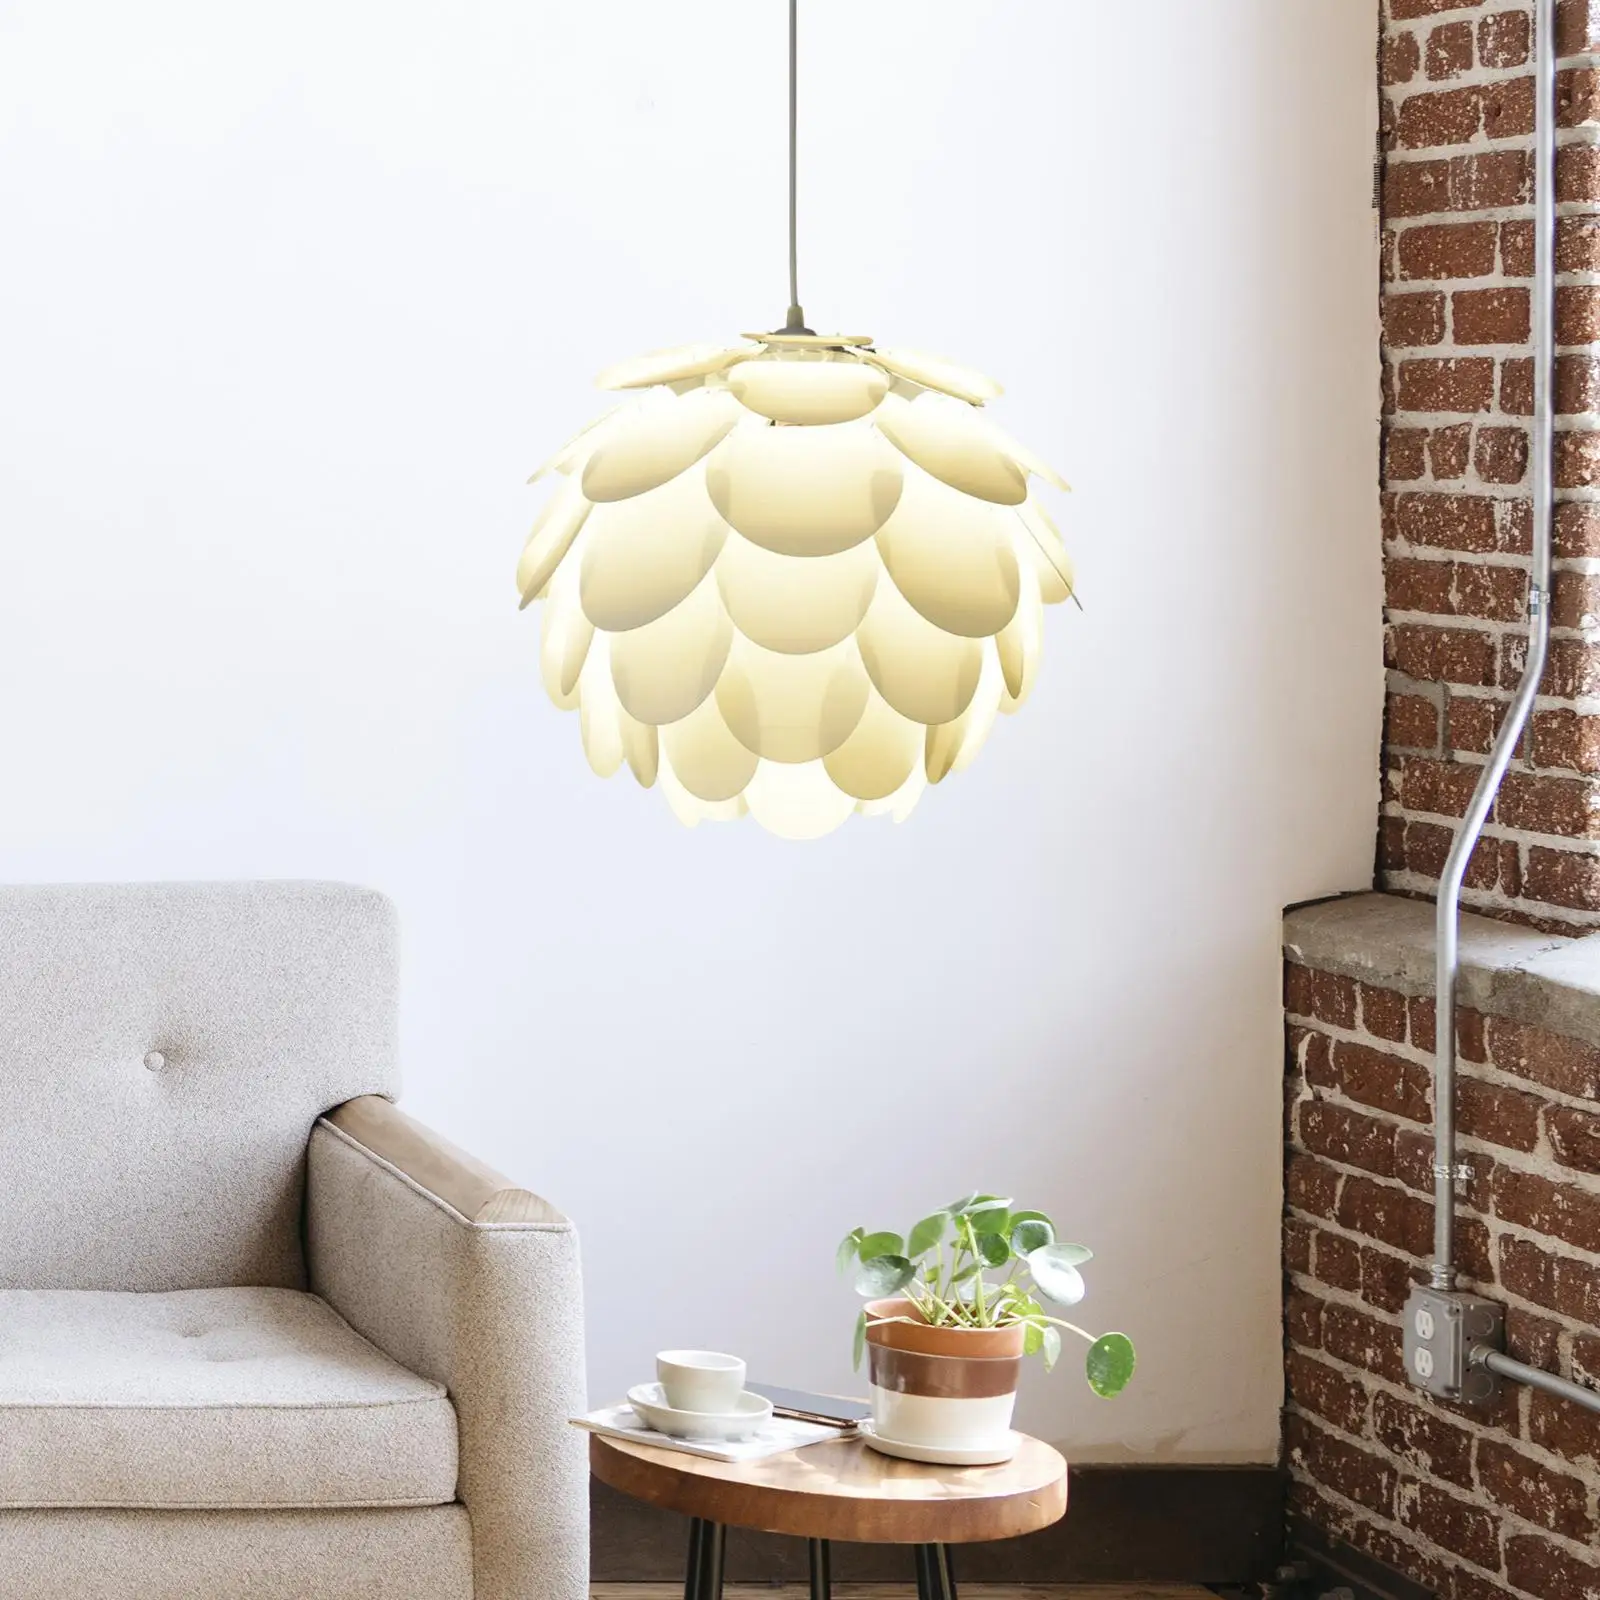 Decorative Lamp Shade Hanging Light Cover Crafts Minimalist Ceiling Light Shade for Club Bedroom Balcony Coffee Shop Decoration